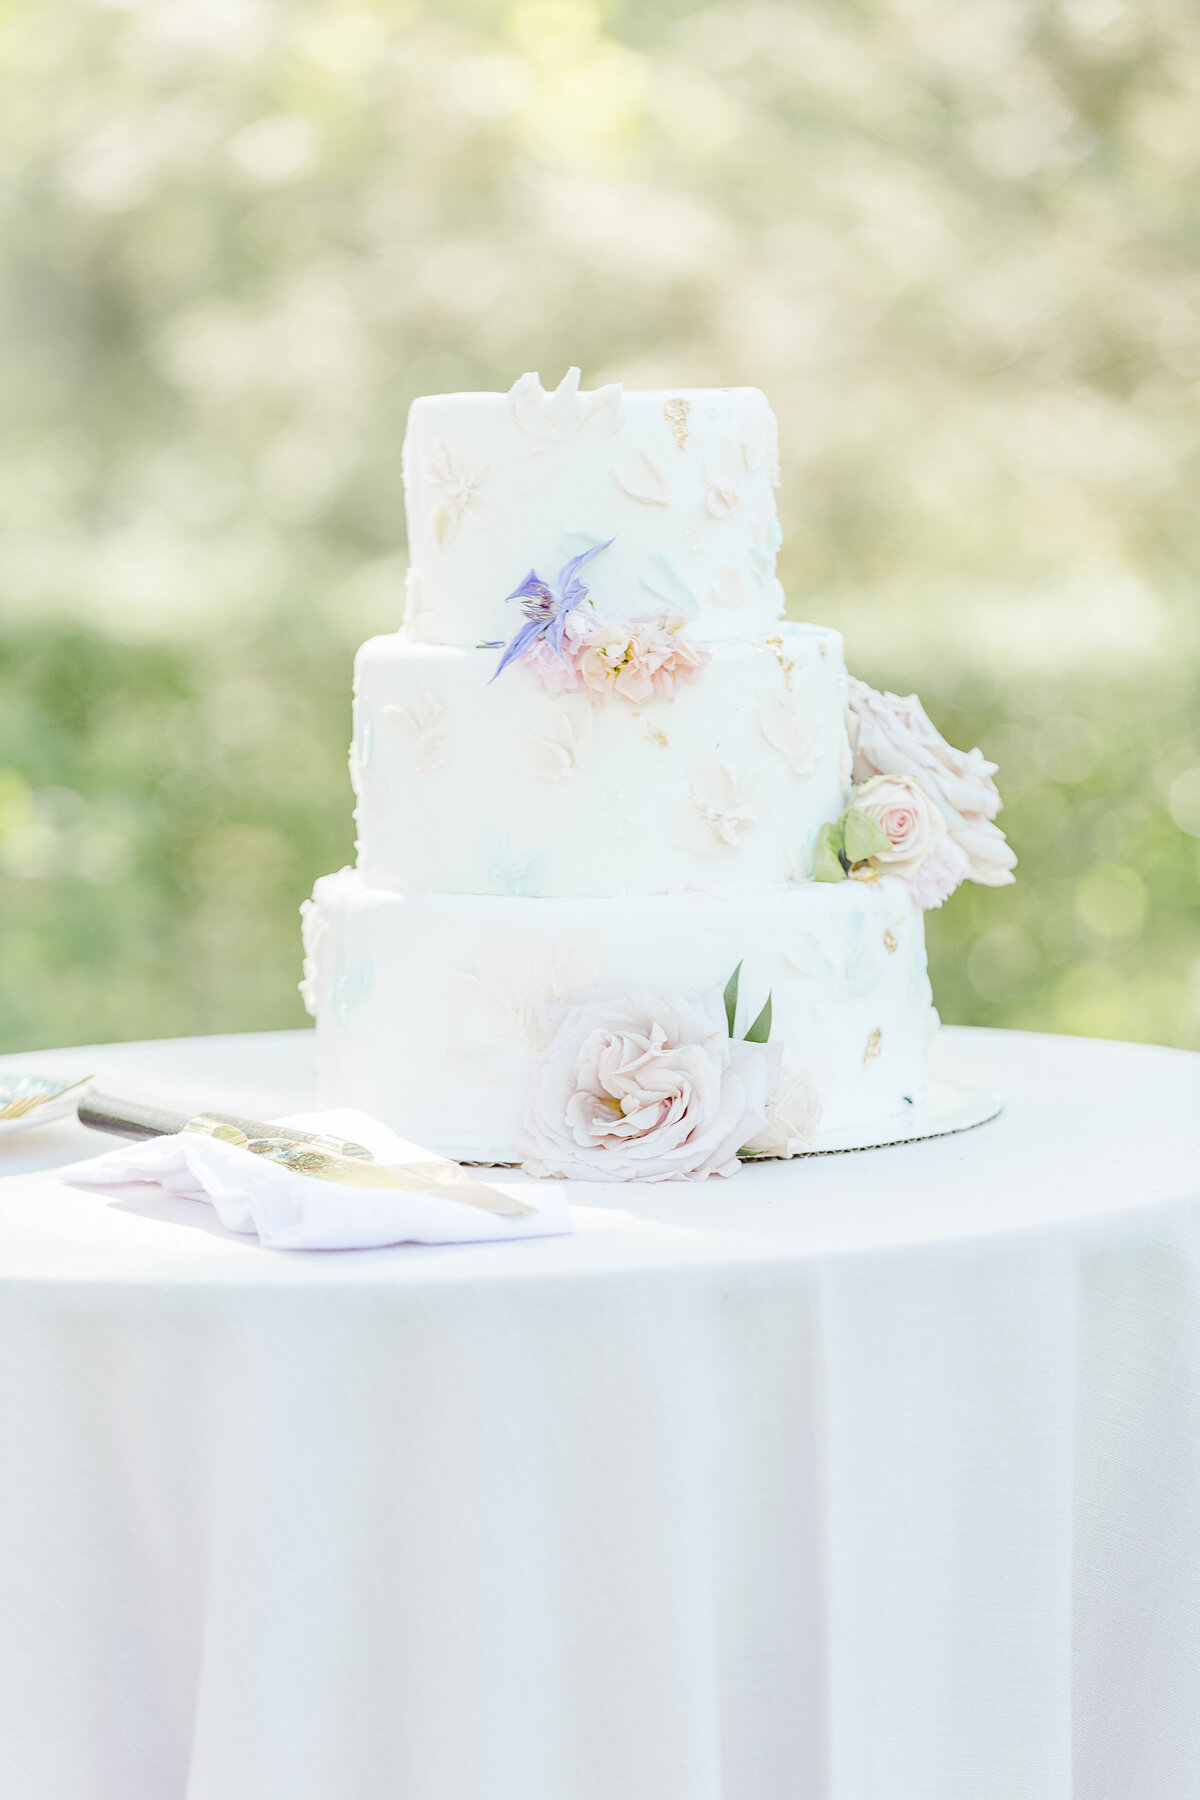 White wedding cake is displayed at an outdoor french-inspired wedding. Captured by best Massachusetts wedding photographer Lia Rose Weddings